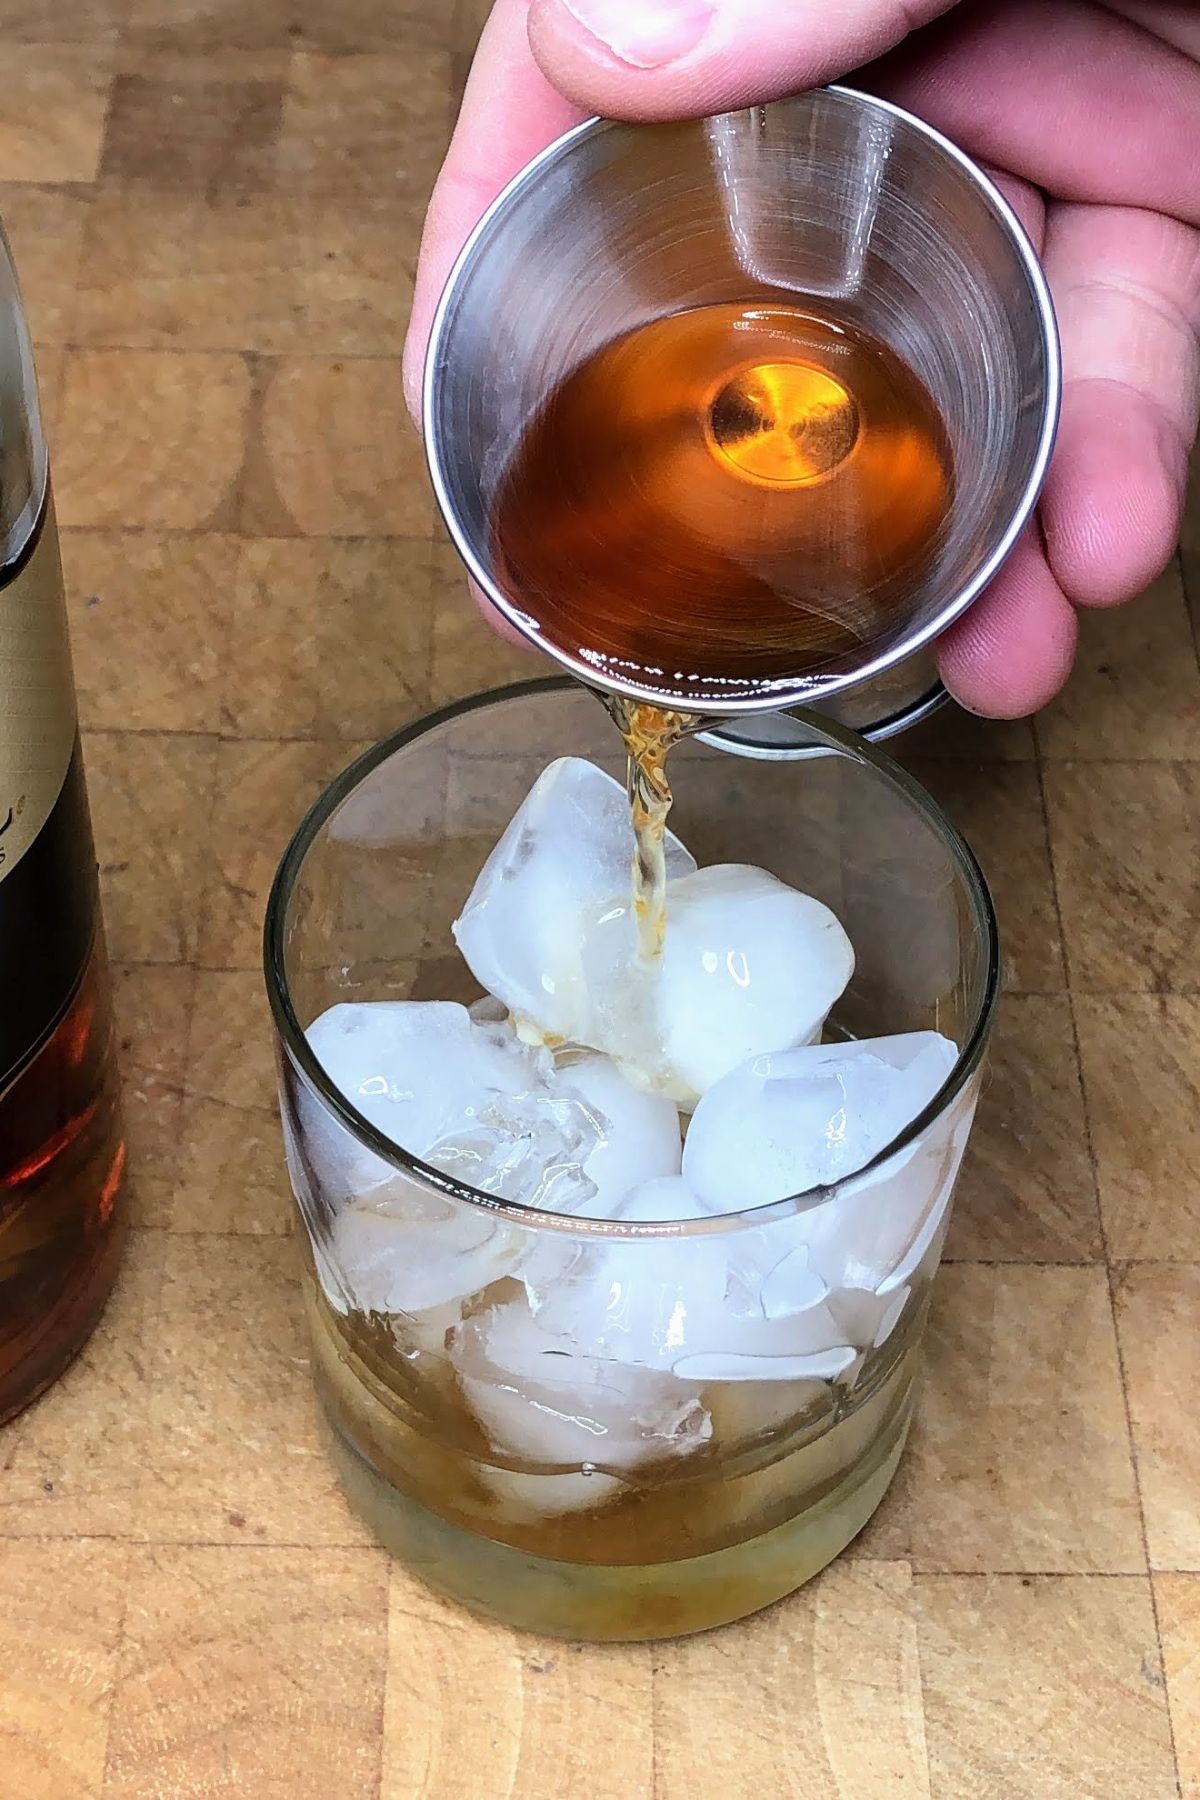 Pouring brandy from a jigger into a glass.